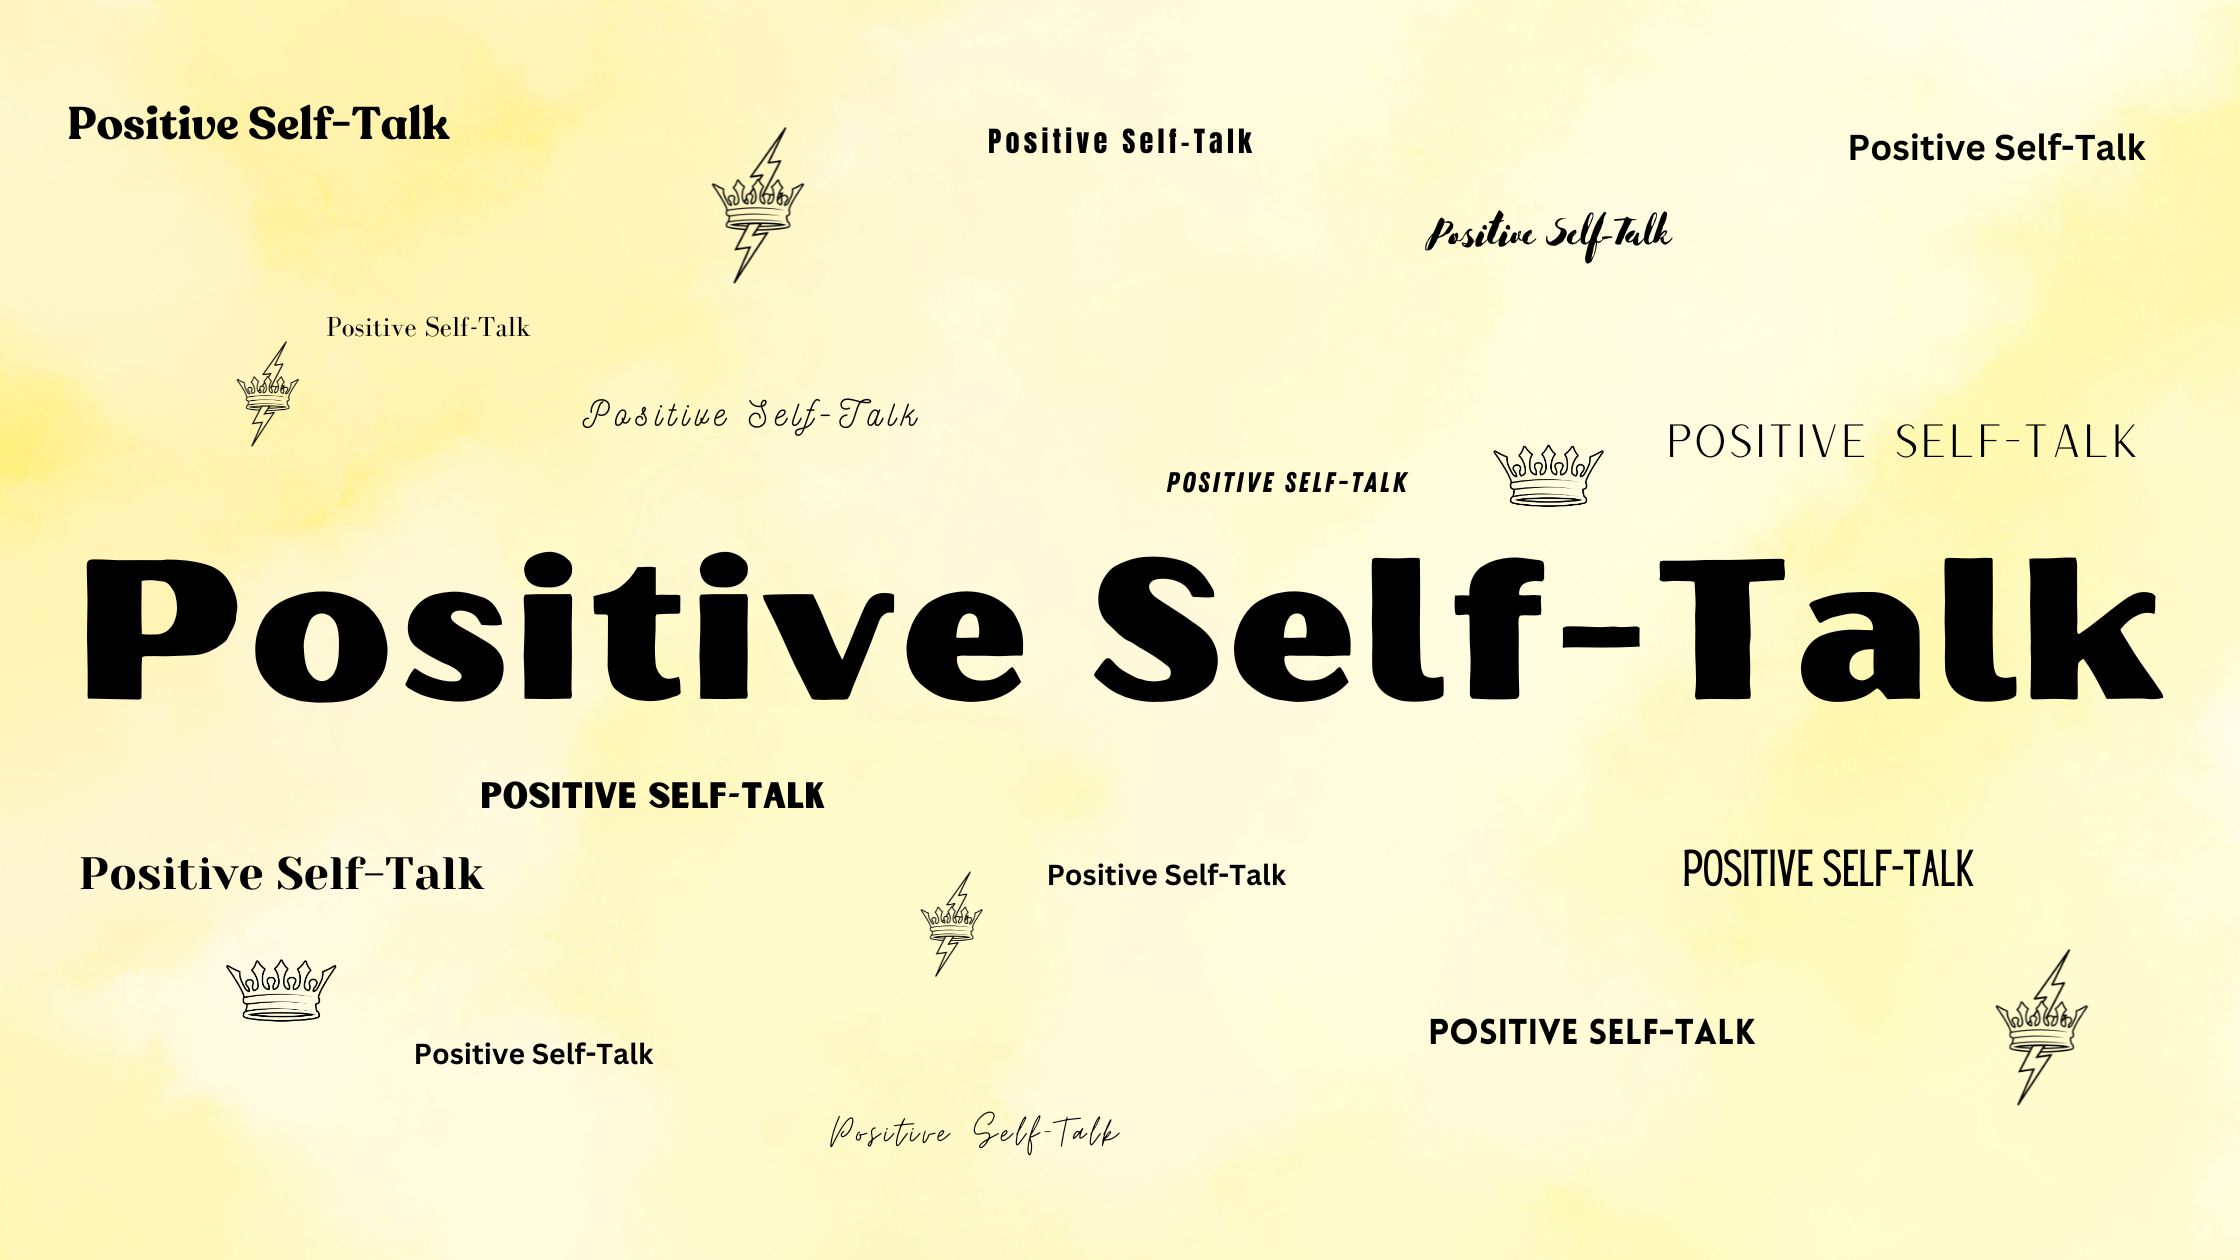 3 Easy Ways to Improve Your Positive Self-Talk